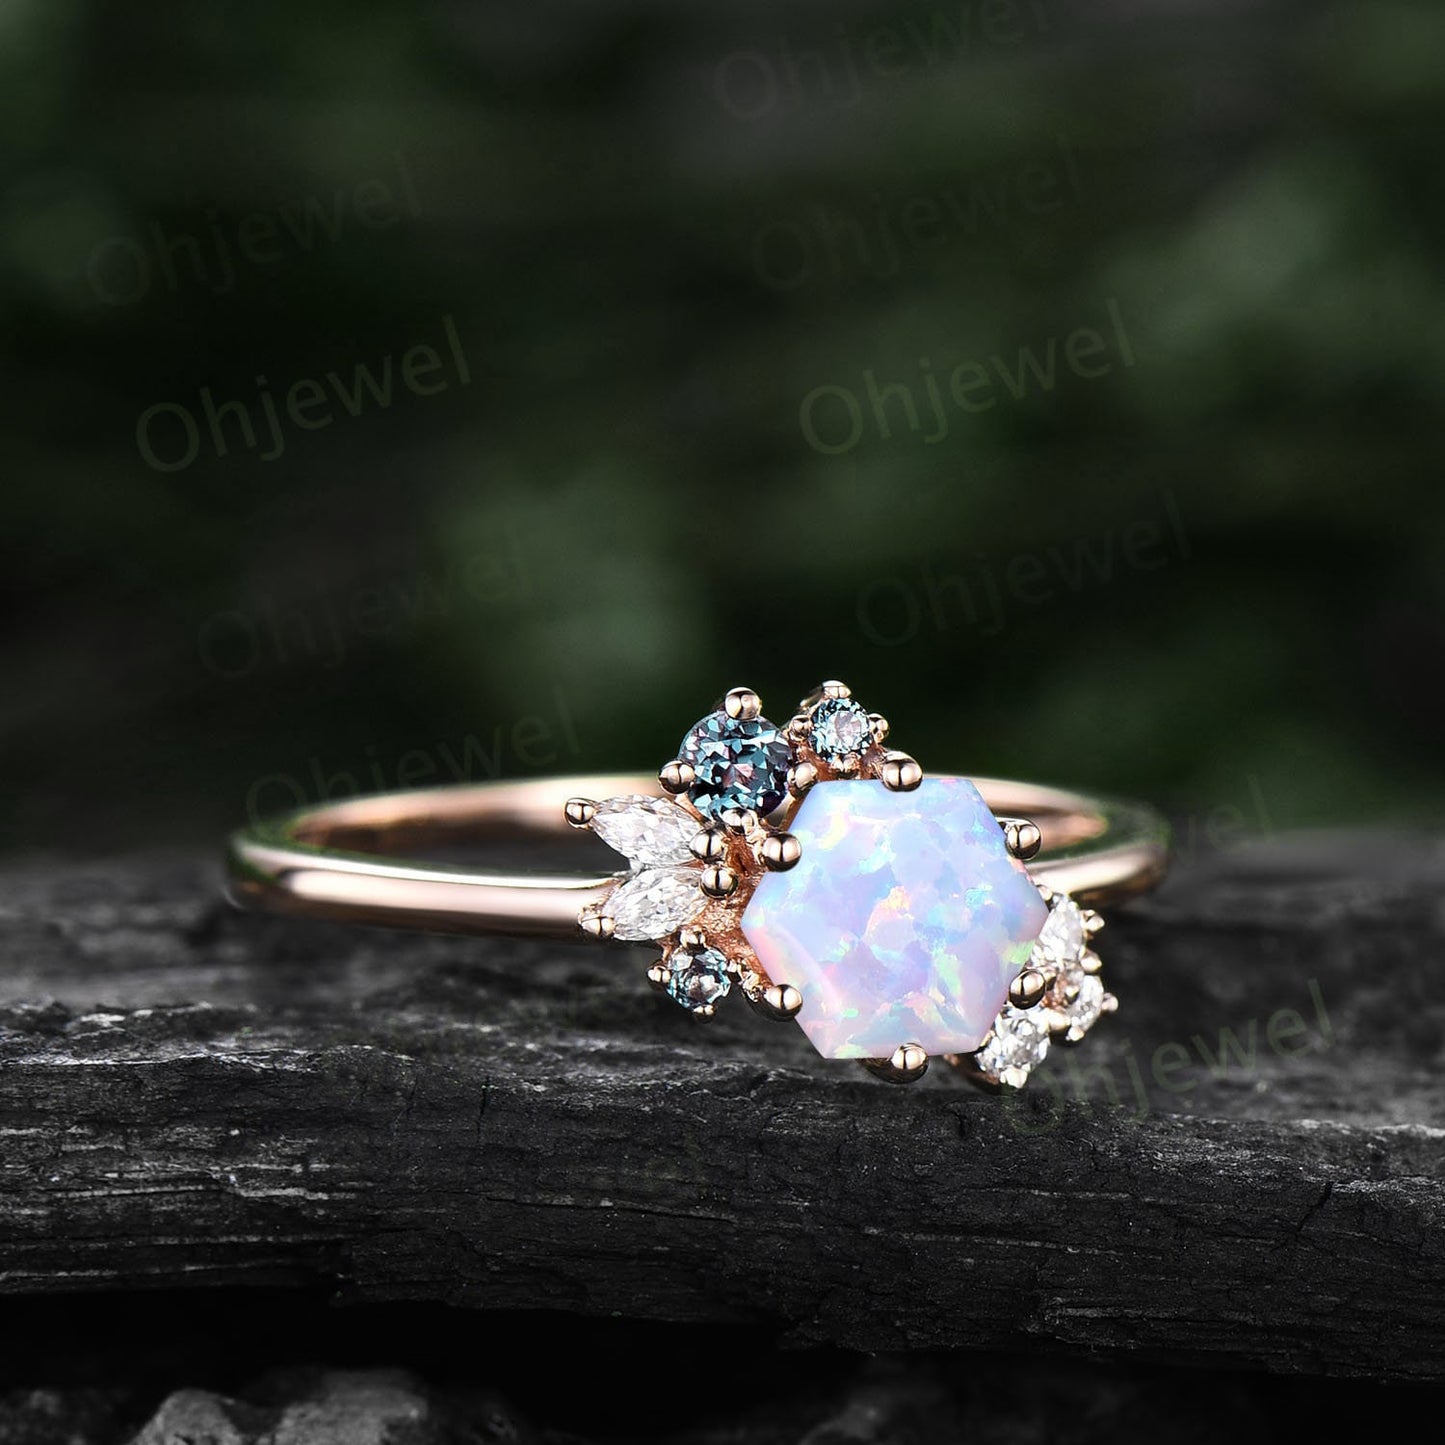 Vintage Hexagon cut white opal engagement ring 14k yellow gold cluster alexandrite marquise cut diamond ring unique anniversary ring gifts